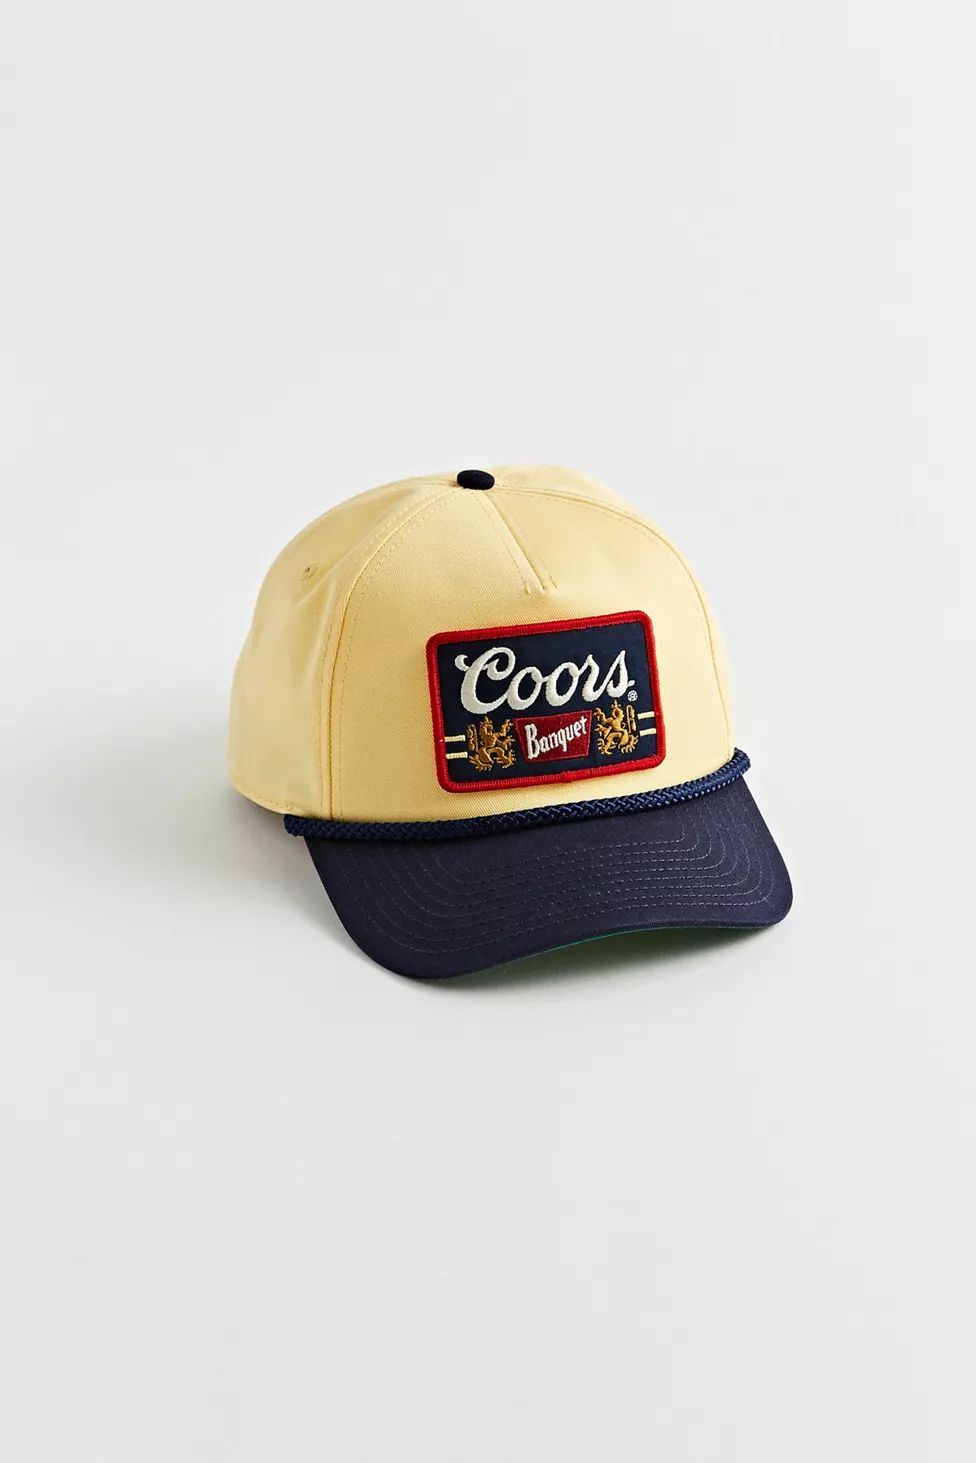 Coors Banquet Old Style Trucker Hat | Urban Outfitters (US and RoW)